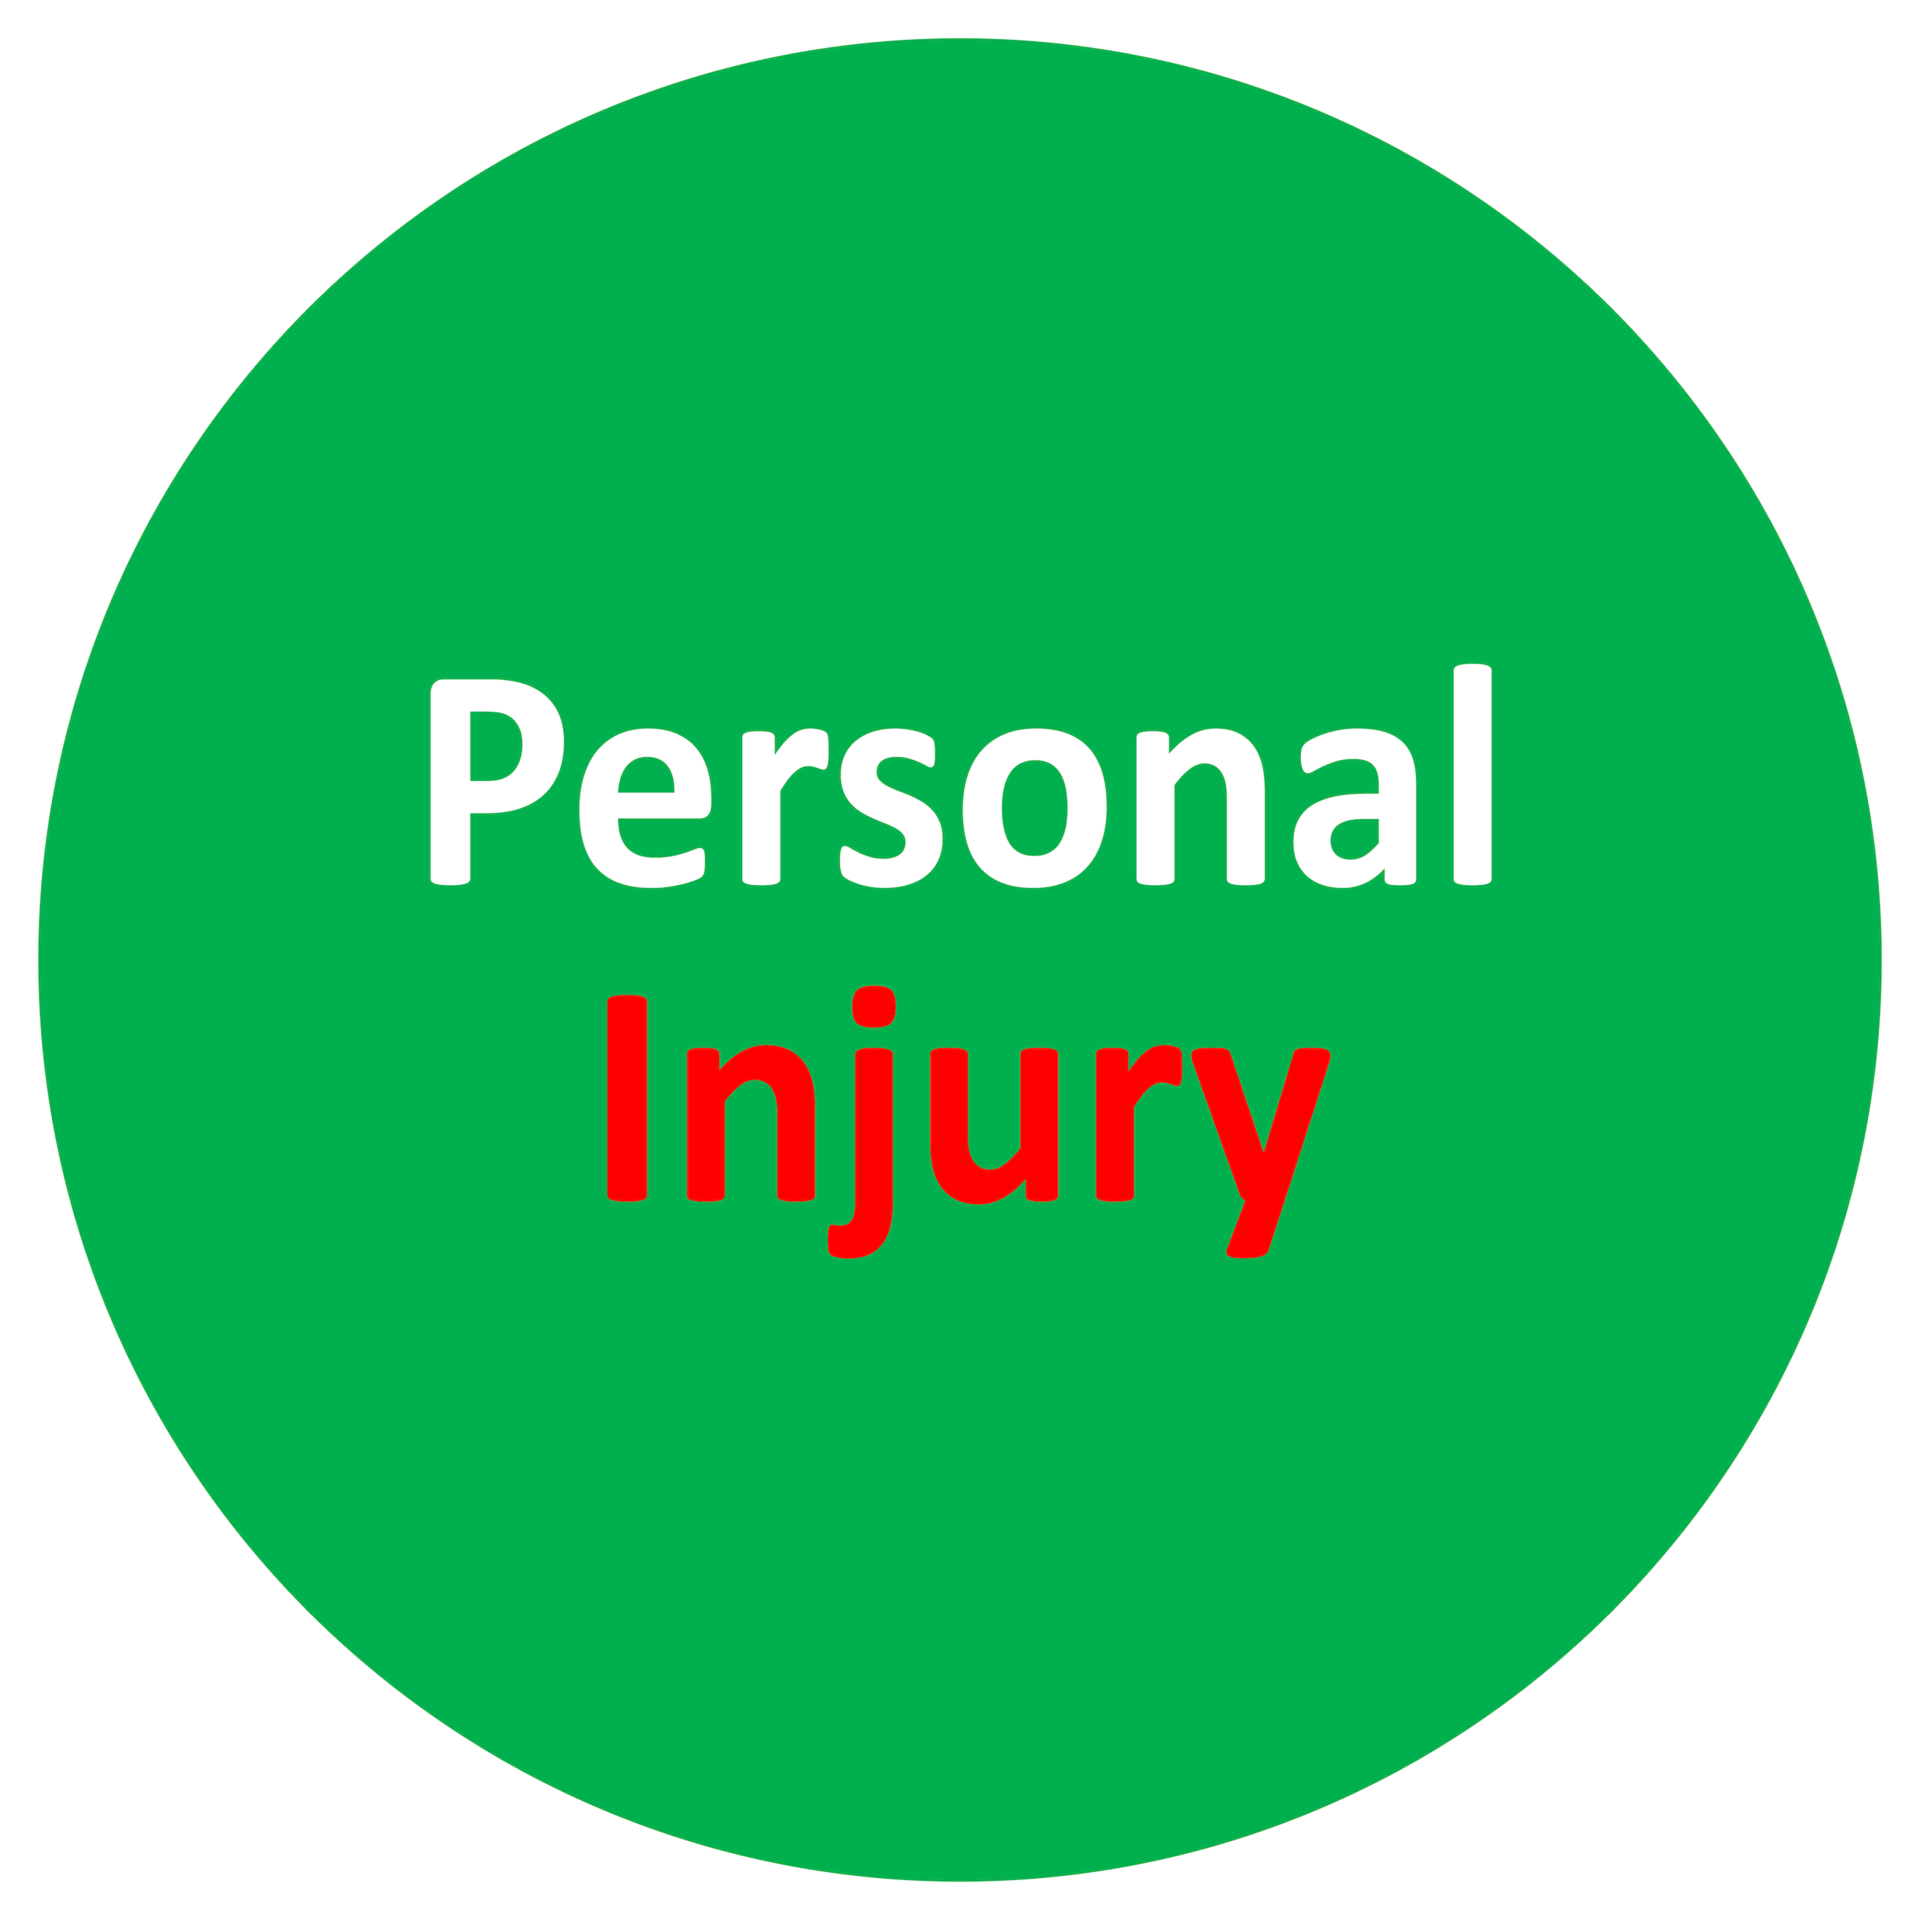 Personal Injury button for access to Personal Injury Claims page